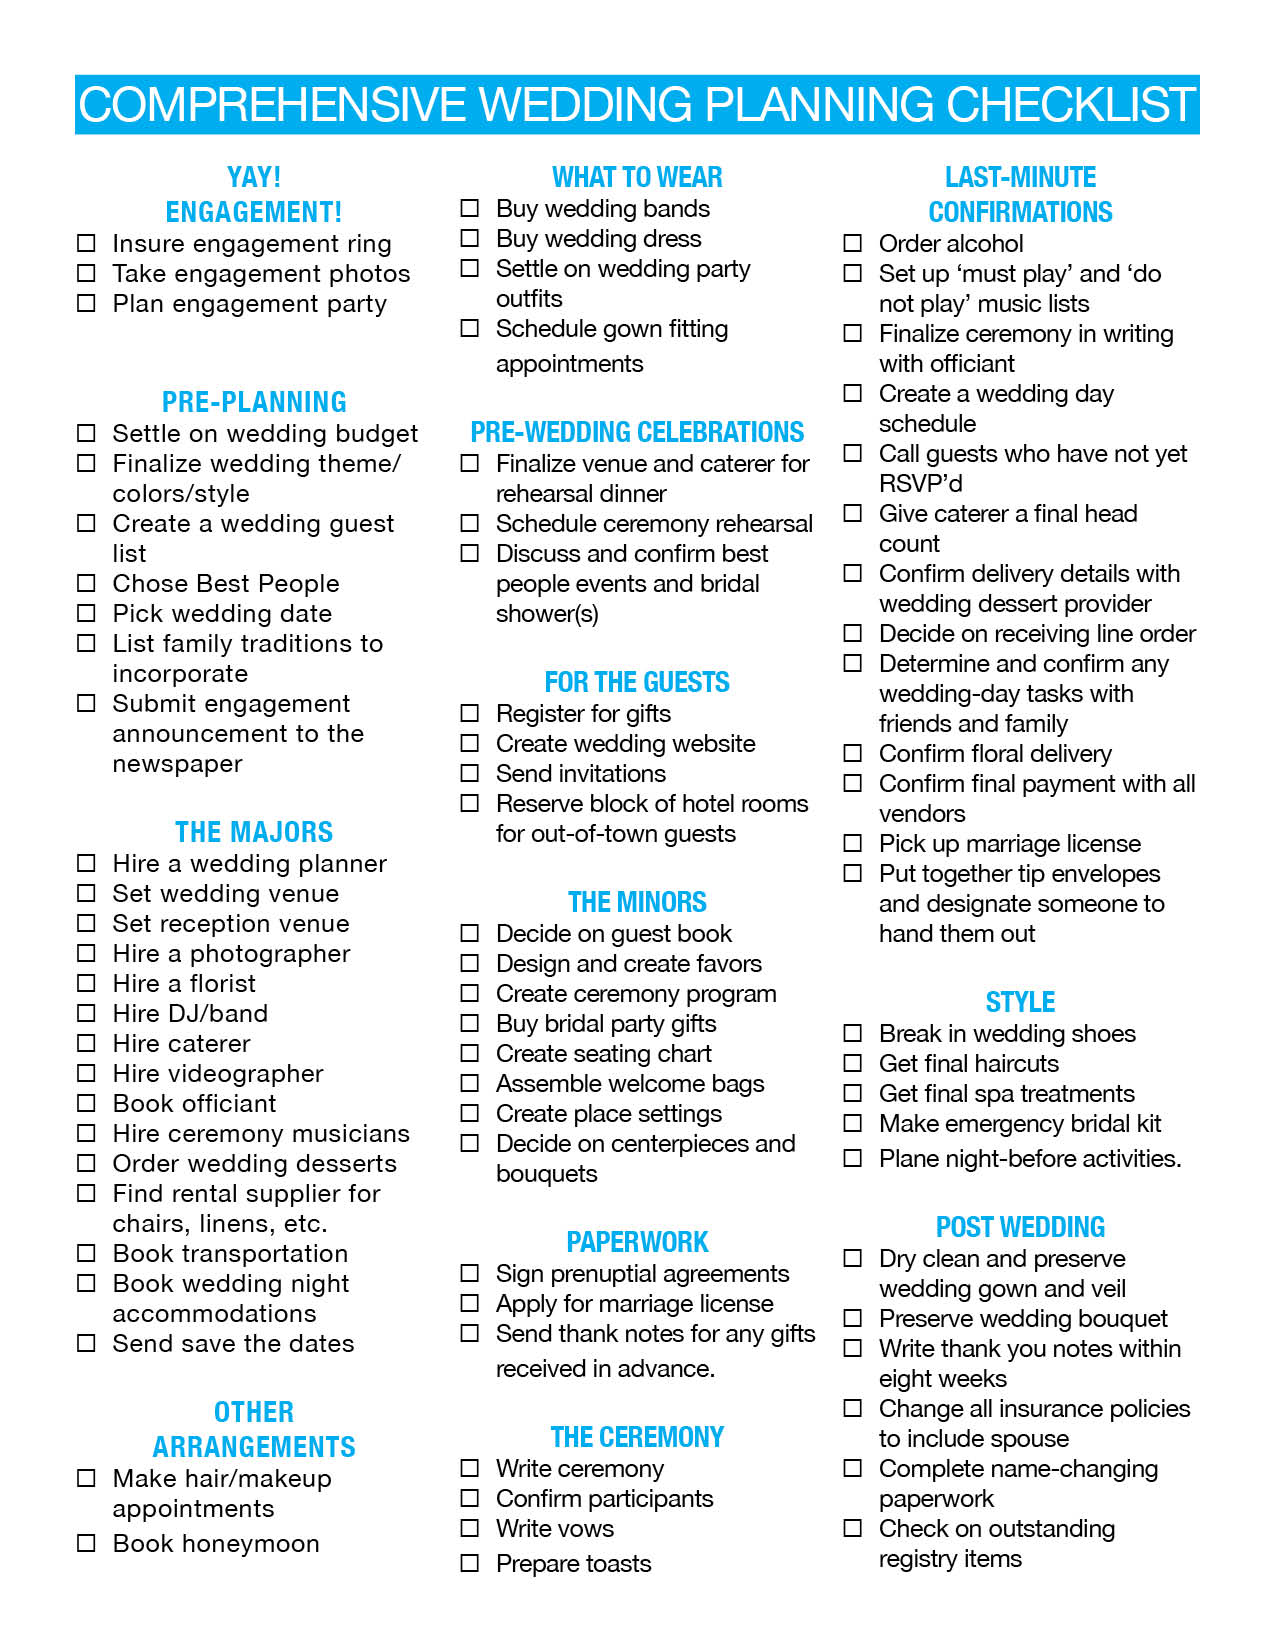 7-best-images-of-printable-wedding-checklist-wedding-beauty-checklist-wedding-planning